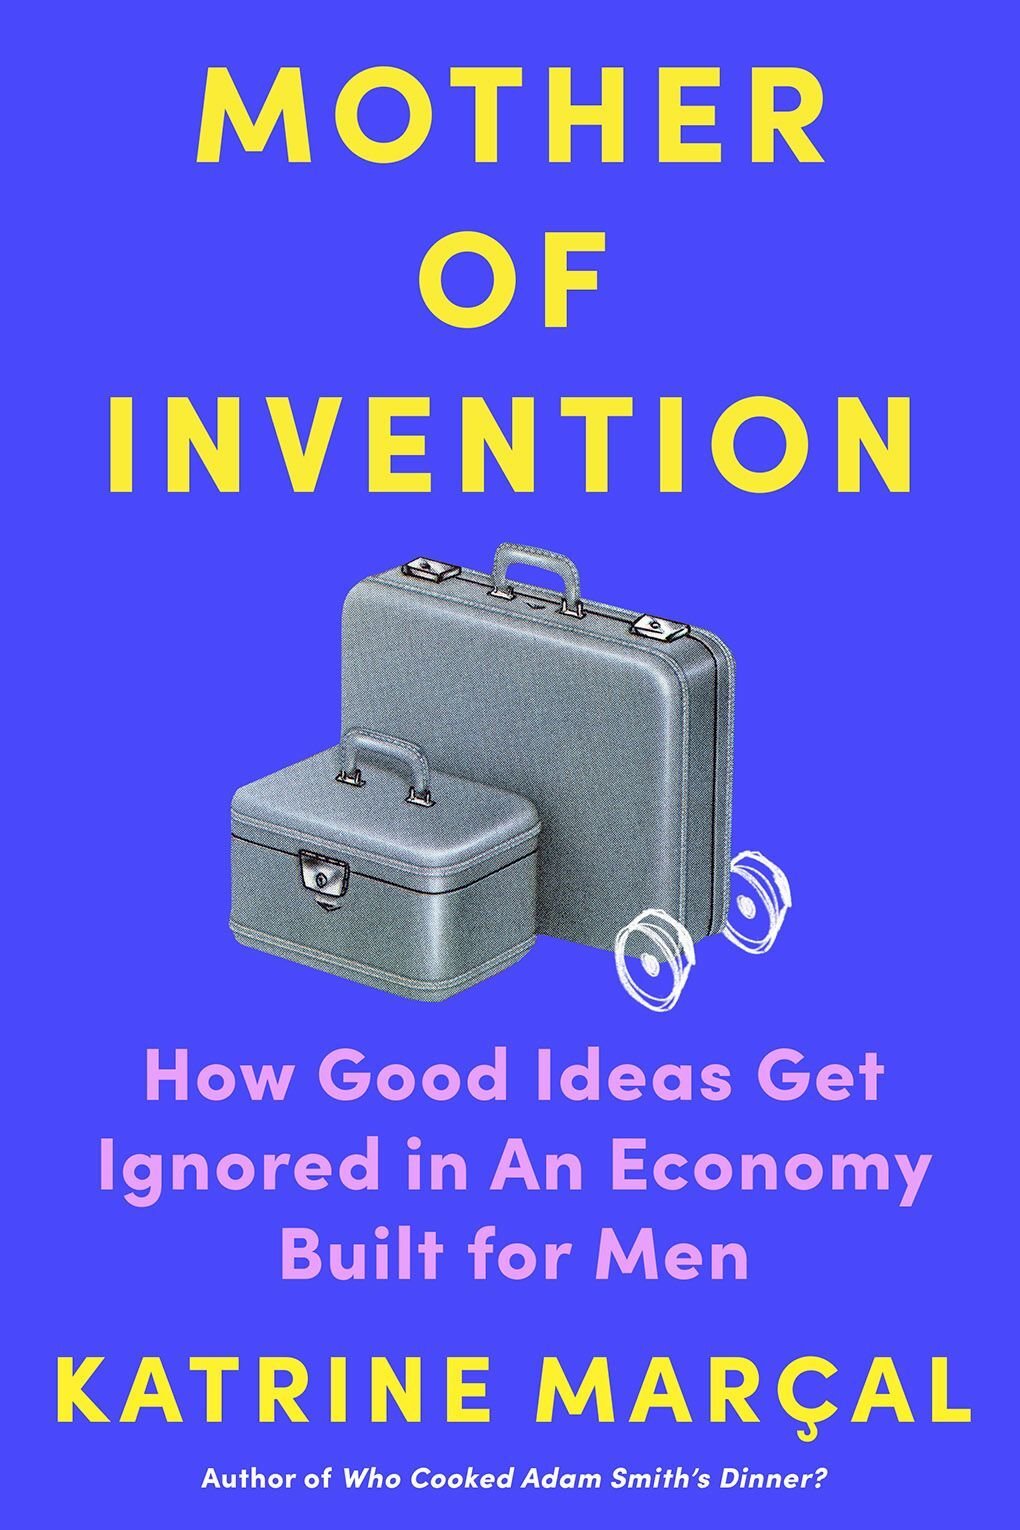 Mother of Invention cover.jpg